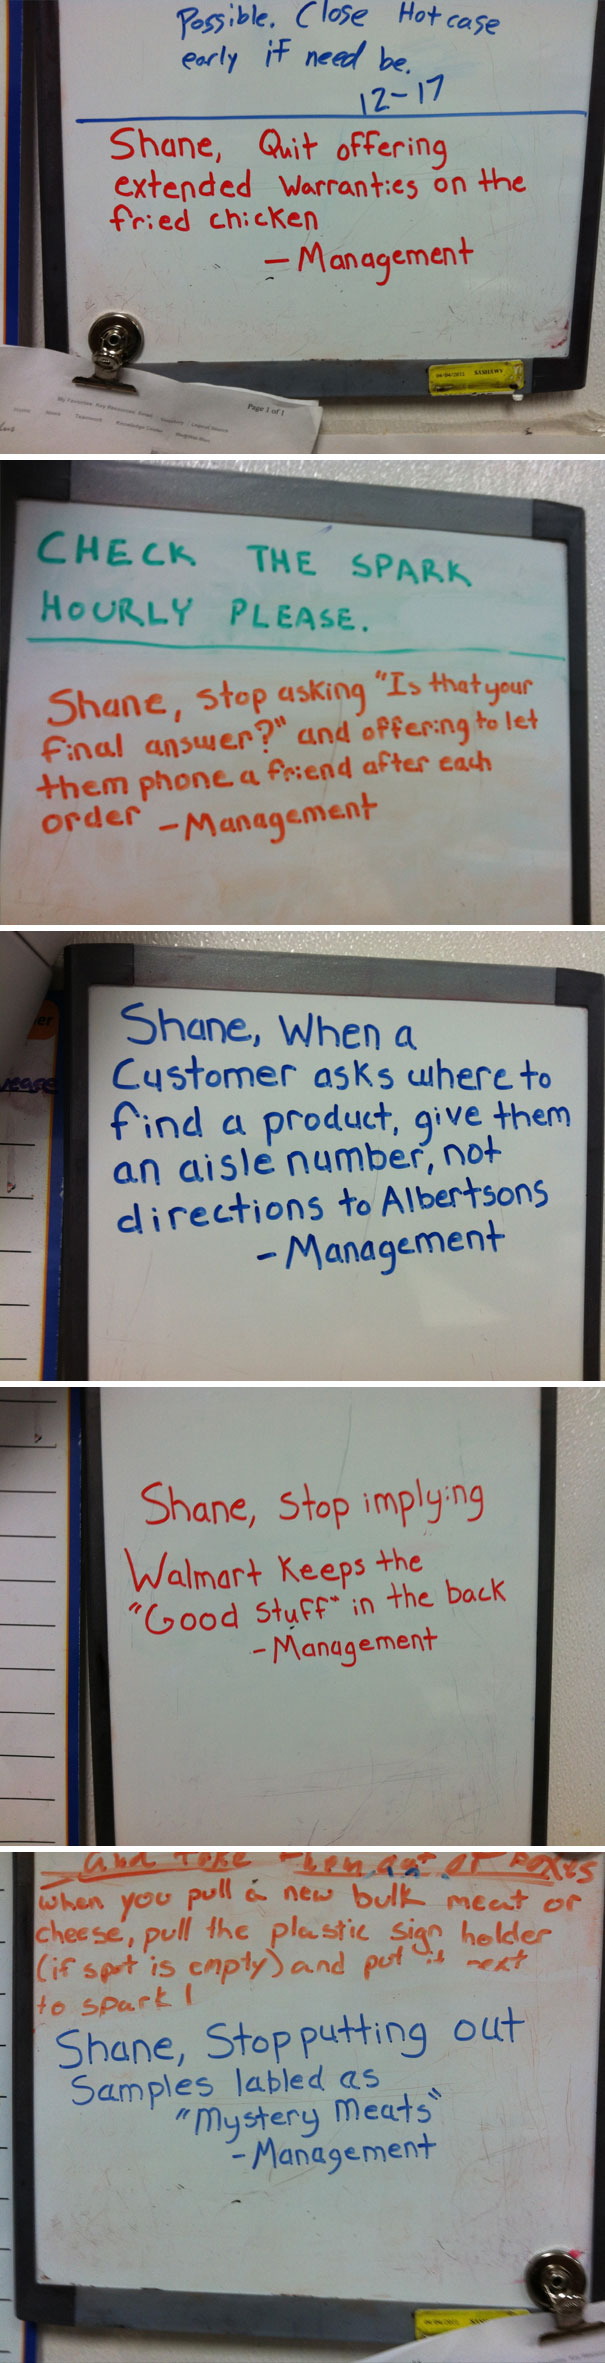 My Coworker At The Walmart Deli Causes A Lot Of Trouble For Management